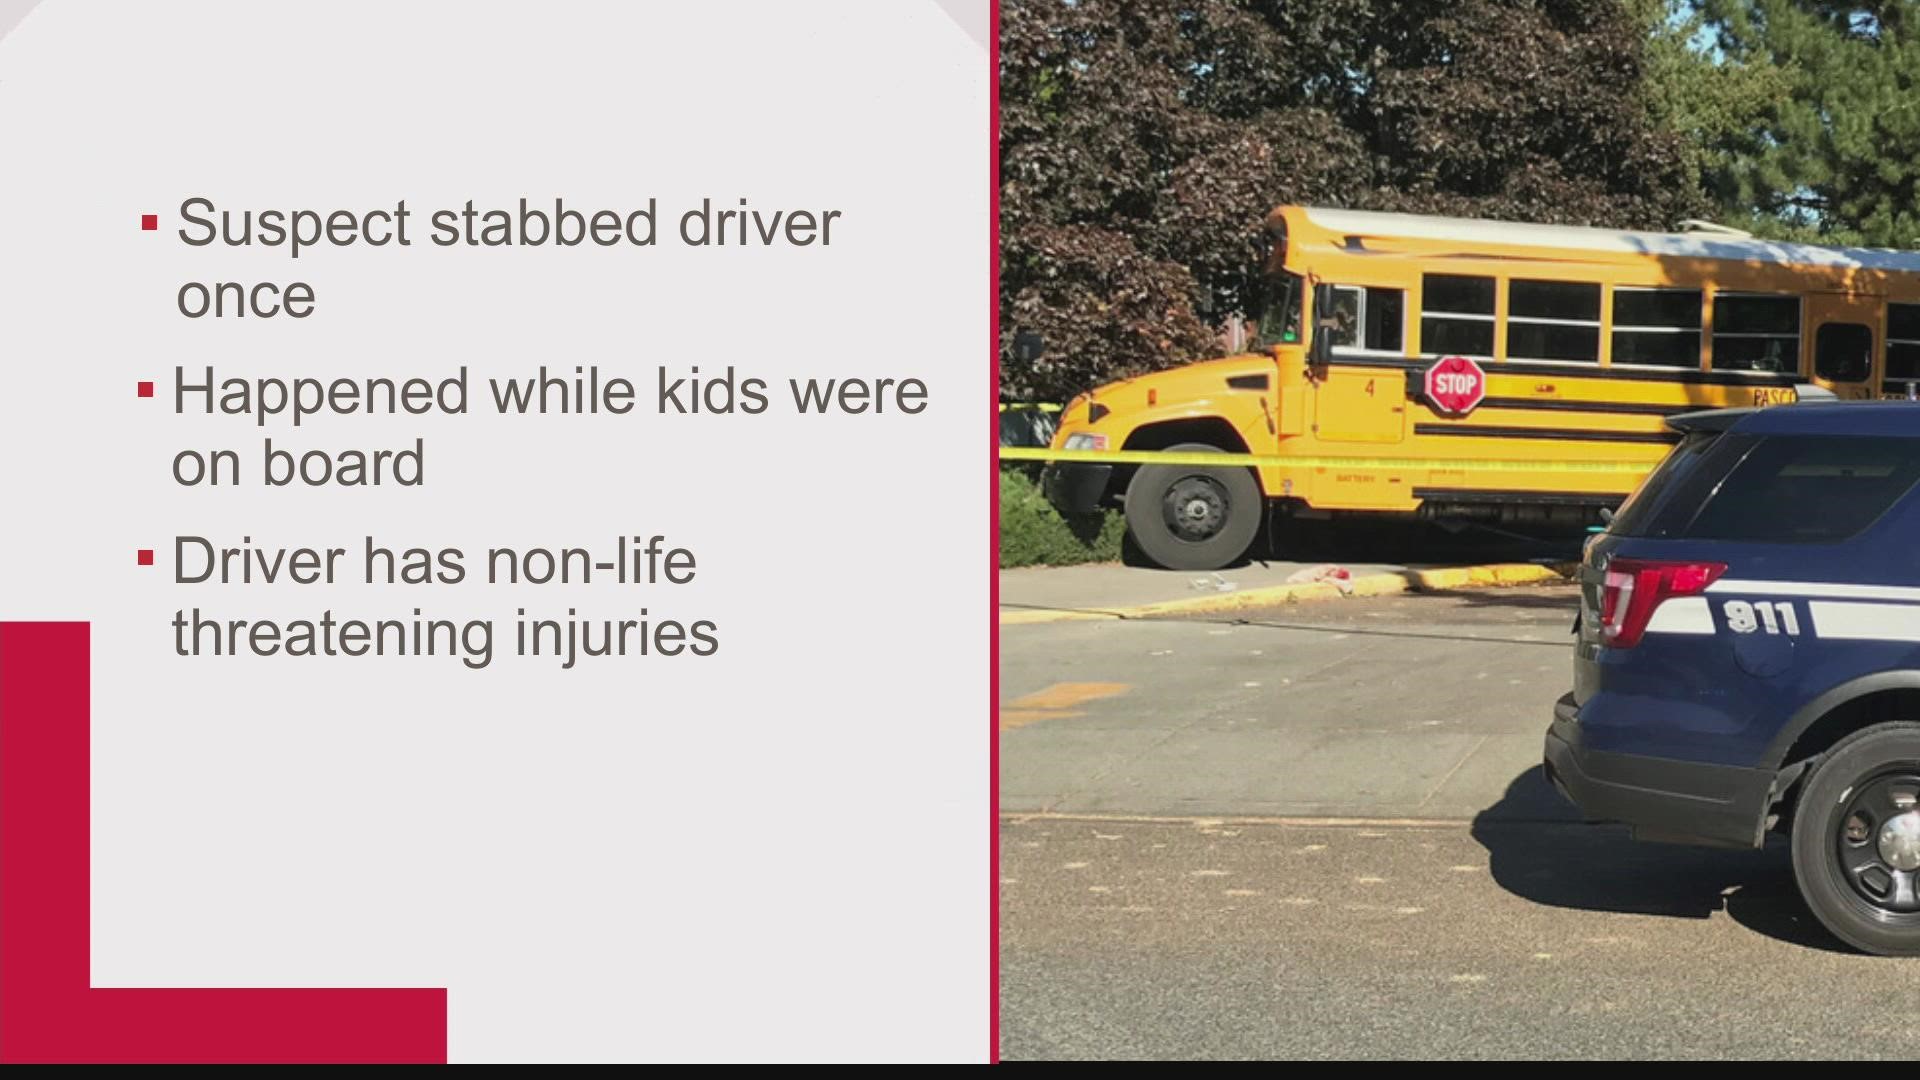 Authorities say they are continuing the investigation after a bus driver was stabbed in front of children